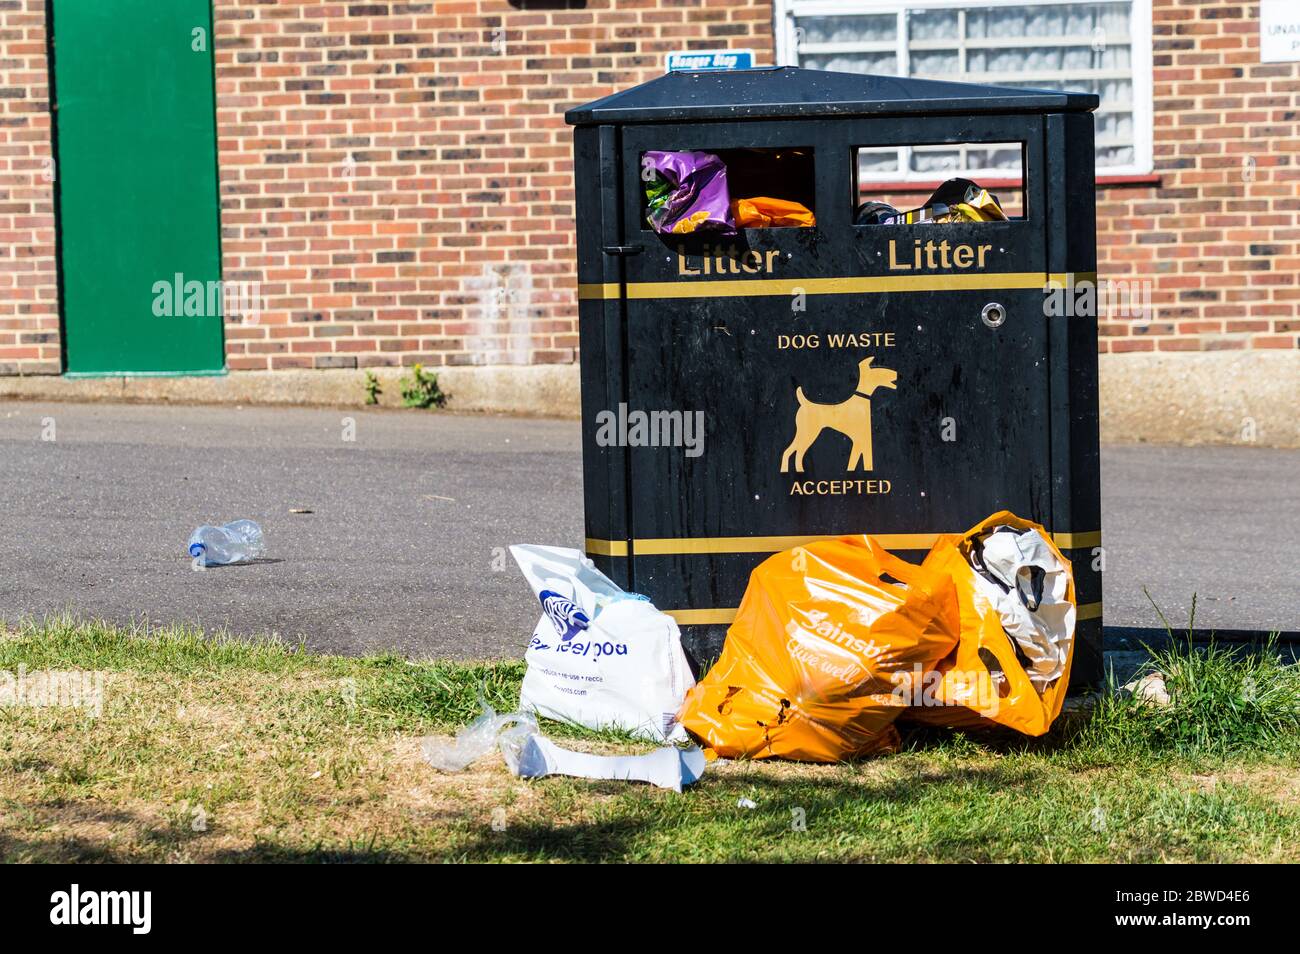 Overflowing bins in London park during hot summer days Stock Photo